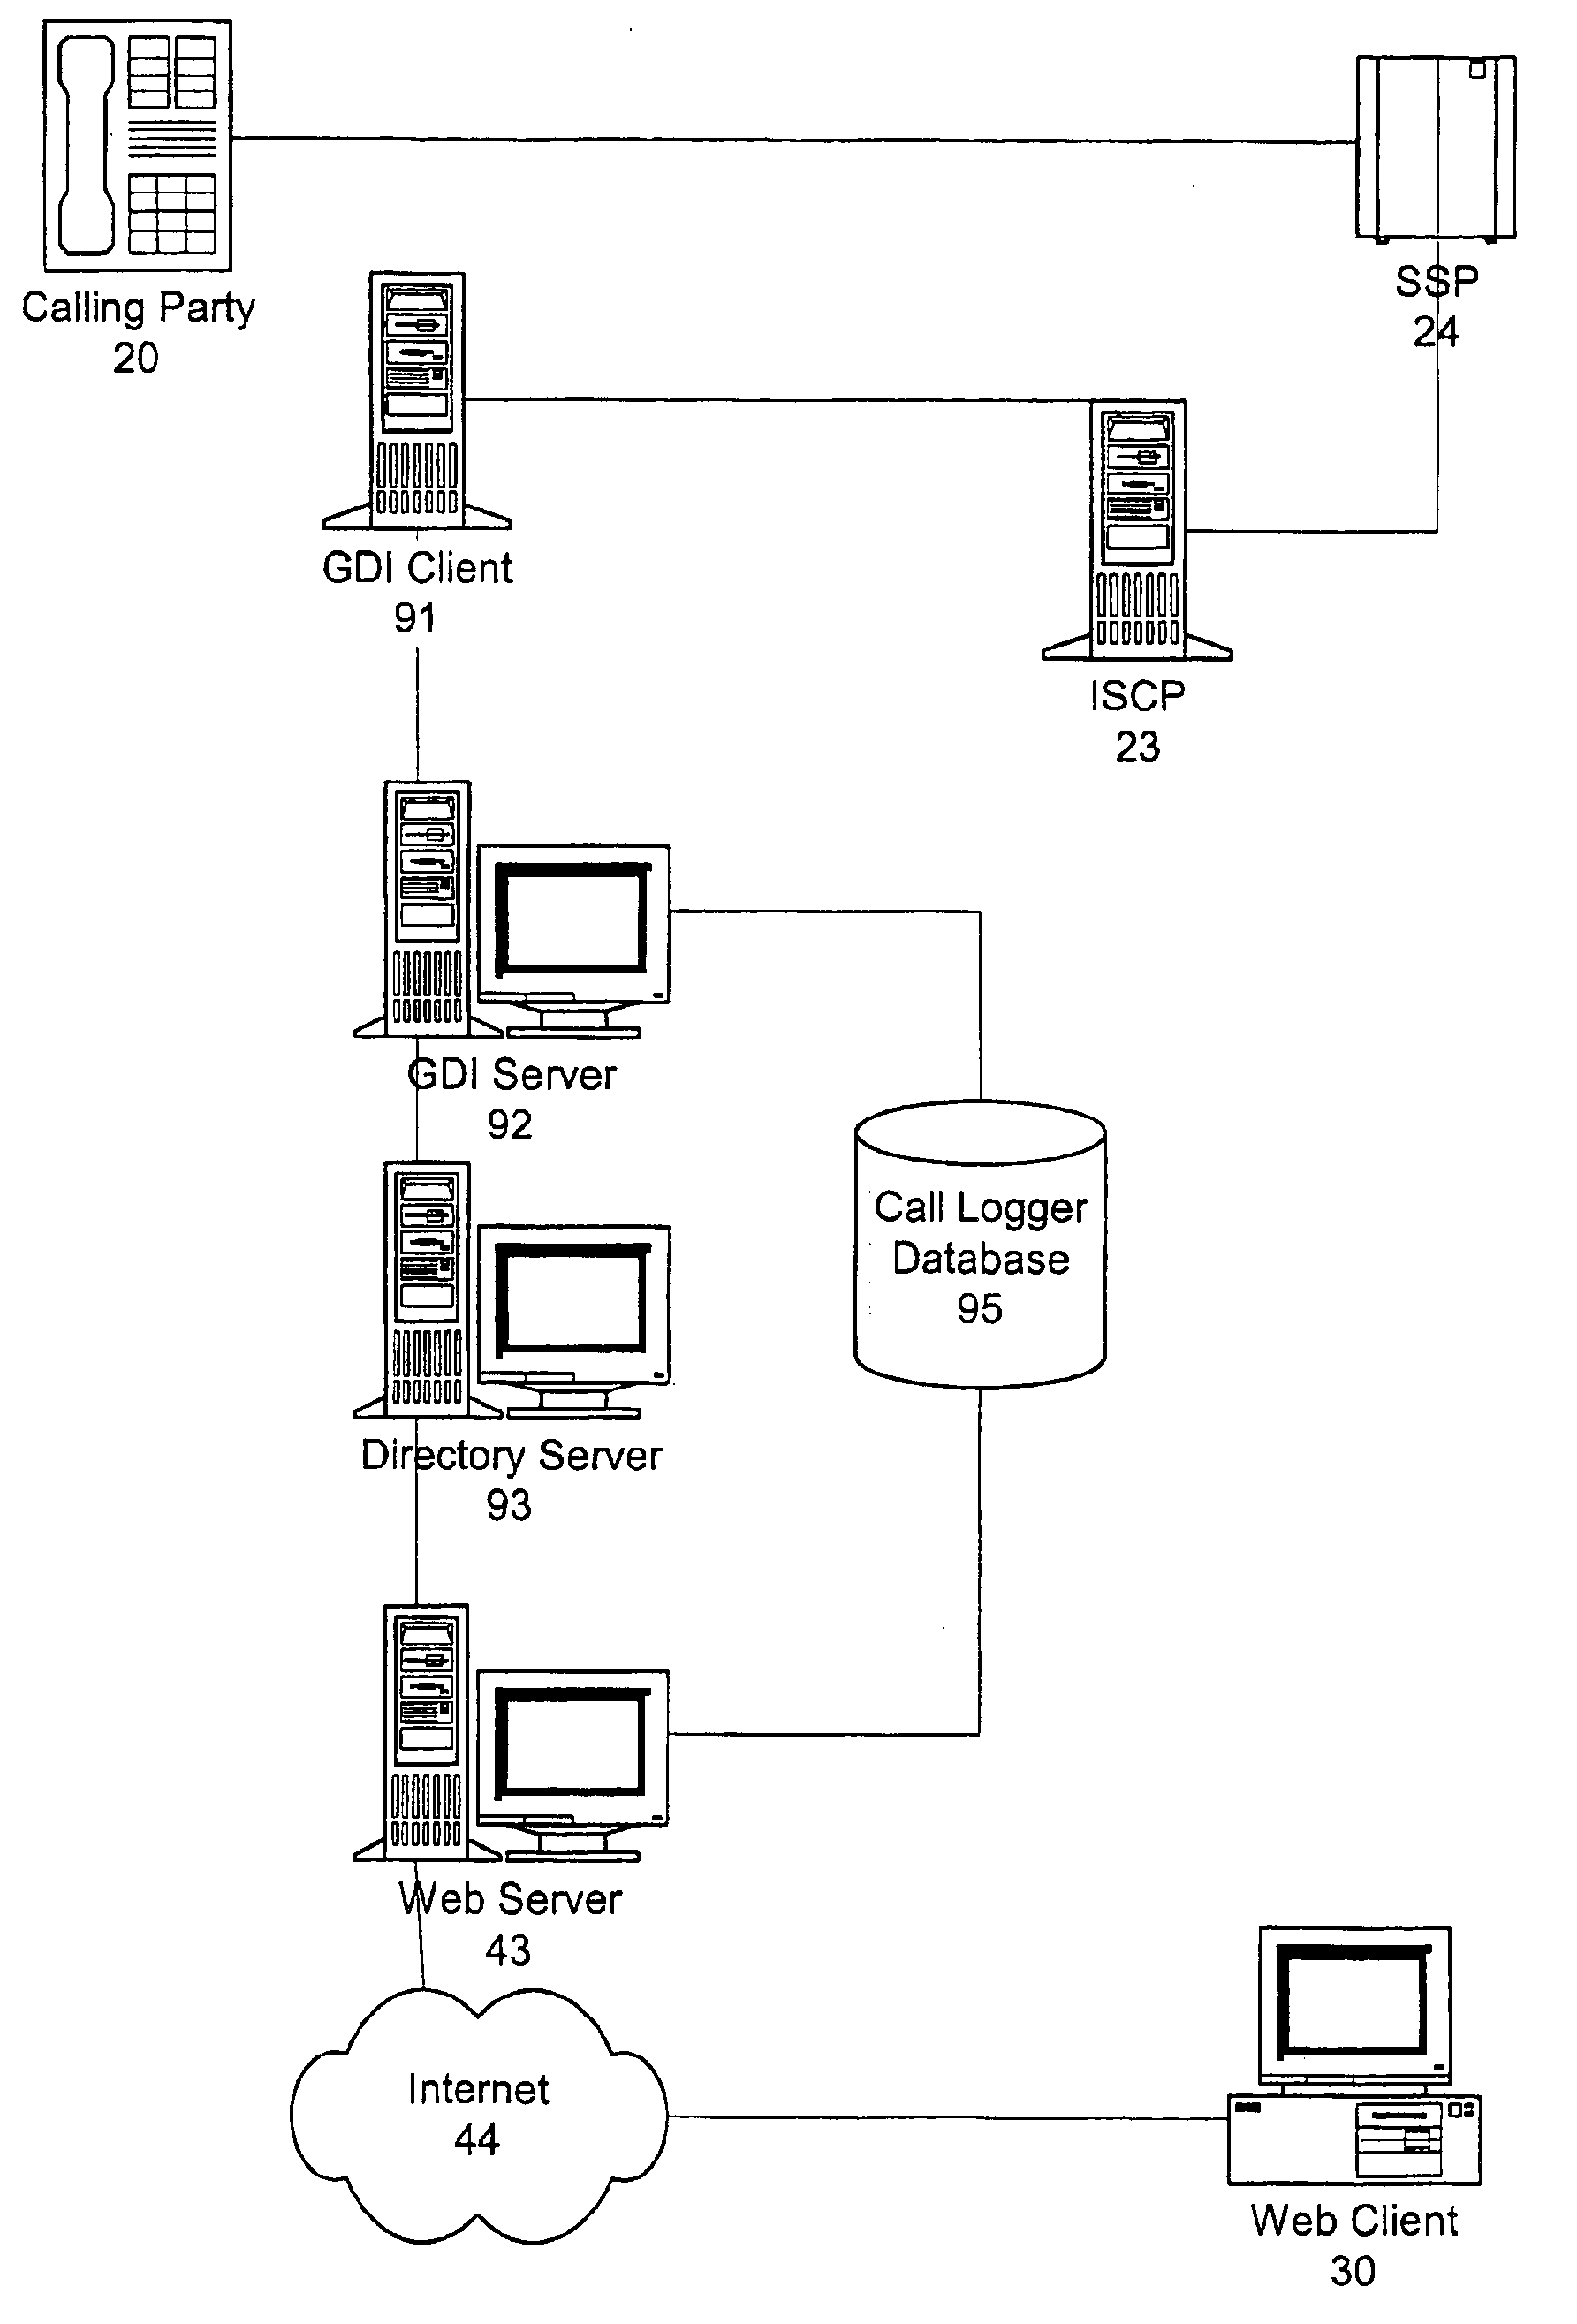 System and method for providing remote access to telecommunications services